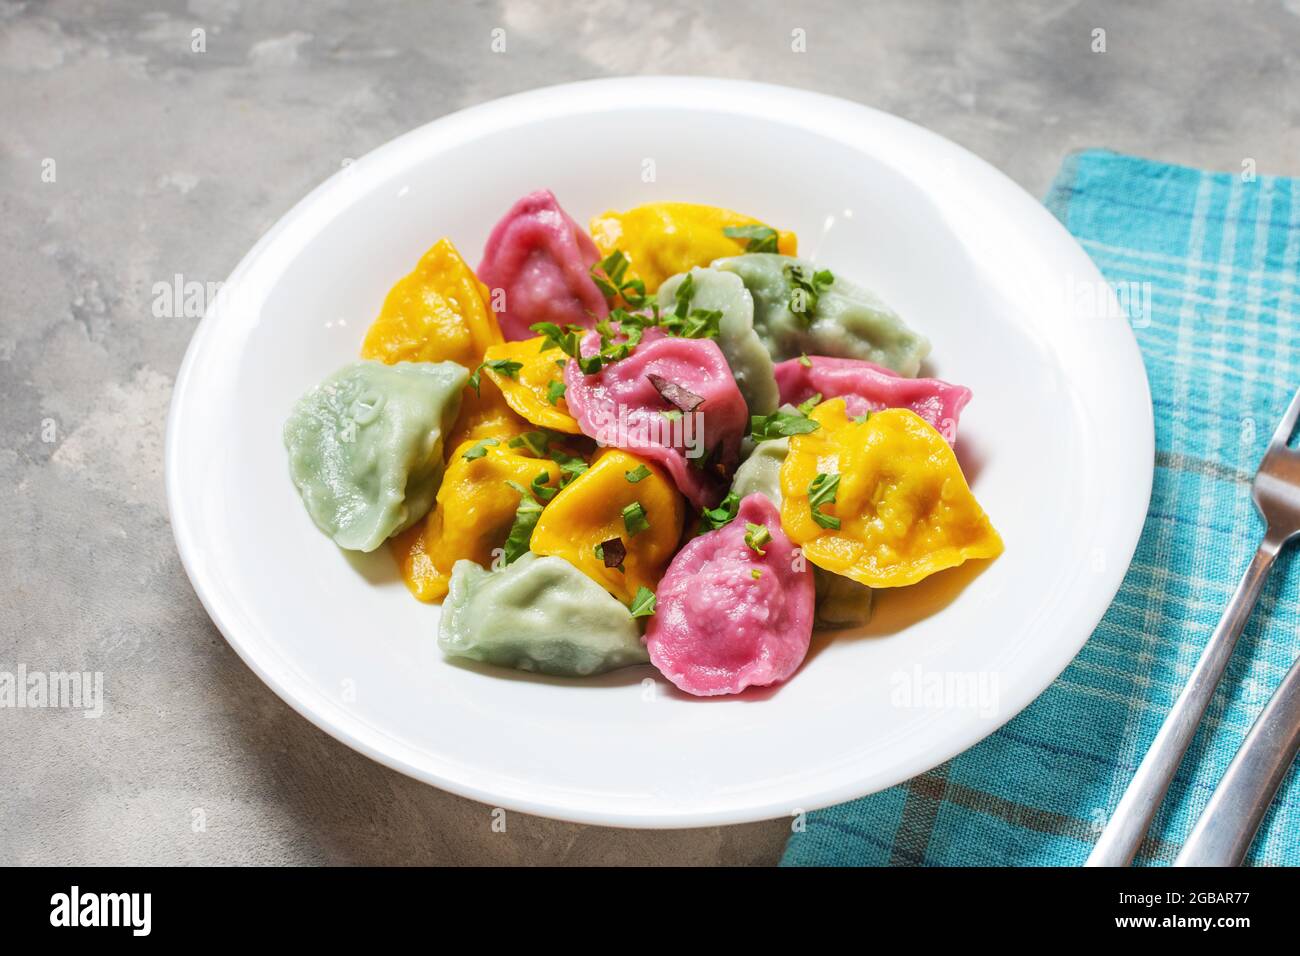 Multi colored dumplings from color dough stuffed with meat on a concrete background Stock Photo